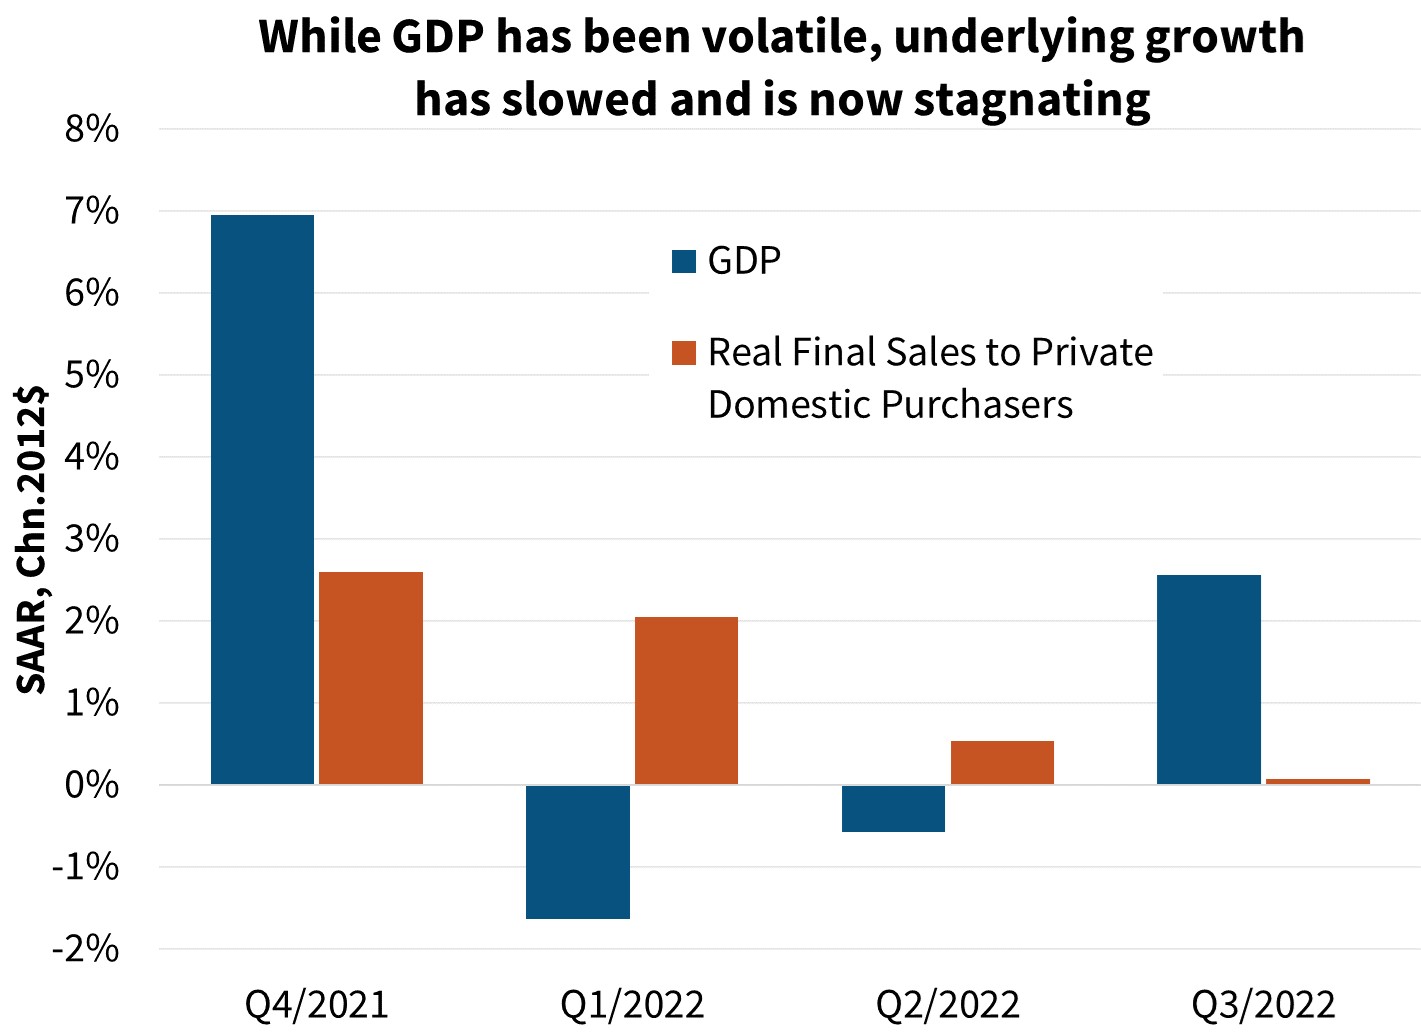  While GDP has been volatile, underlying growth has slowed and is now stagnating 